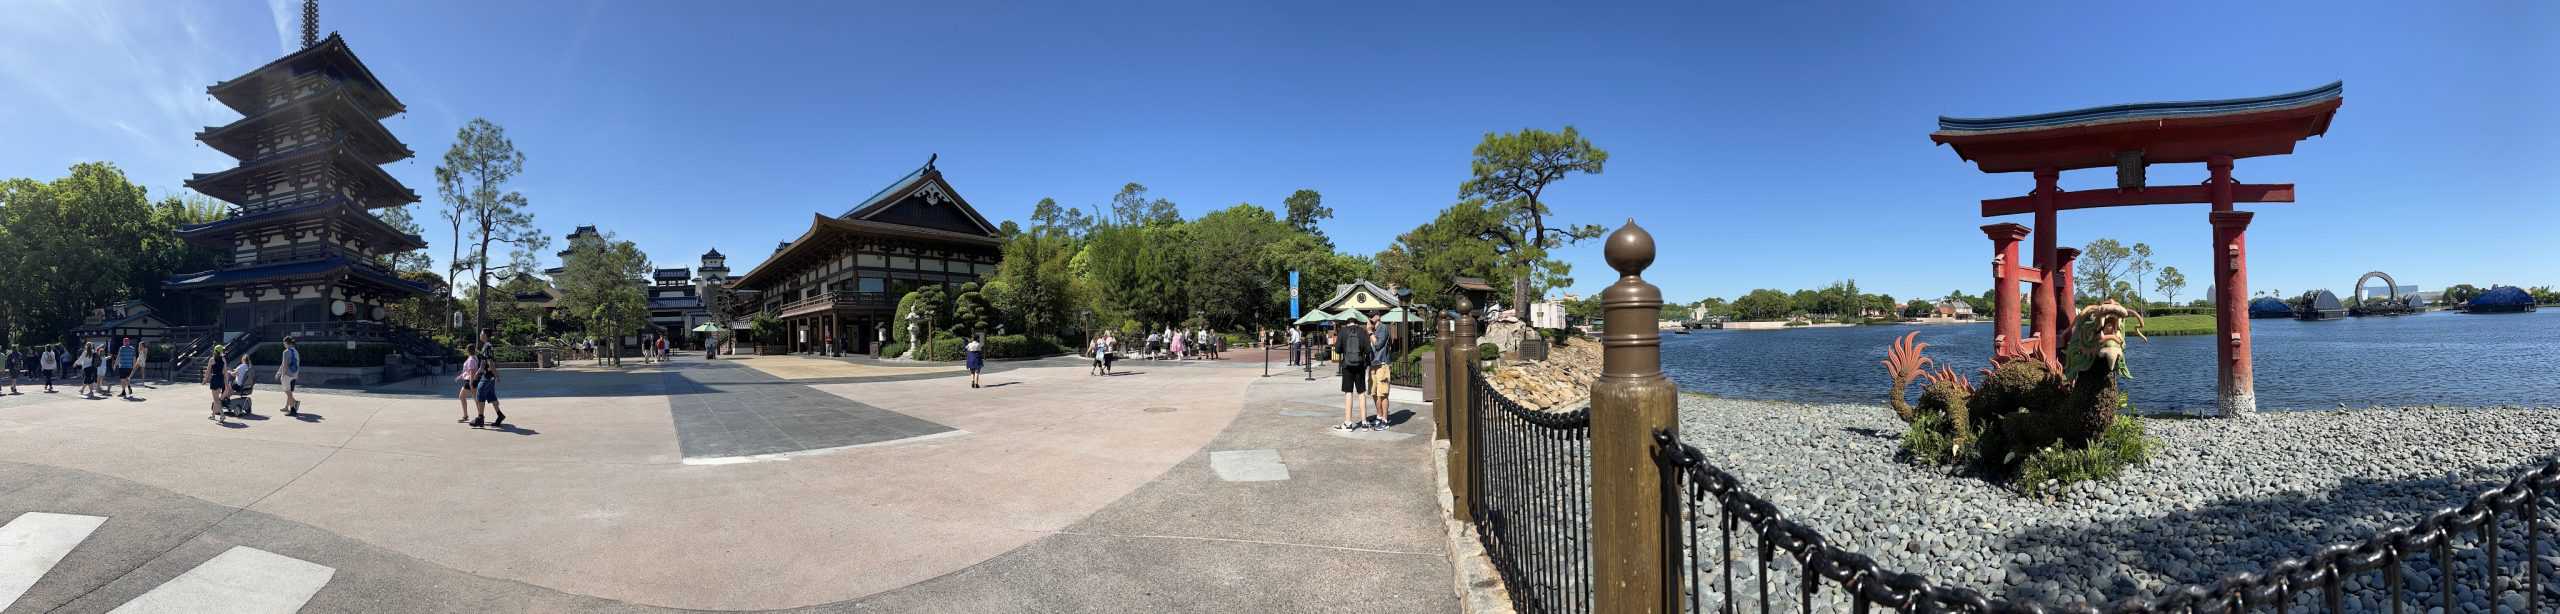 japan pavilion in epcot - panorama view